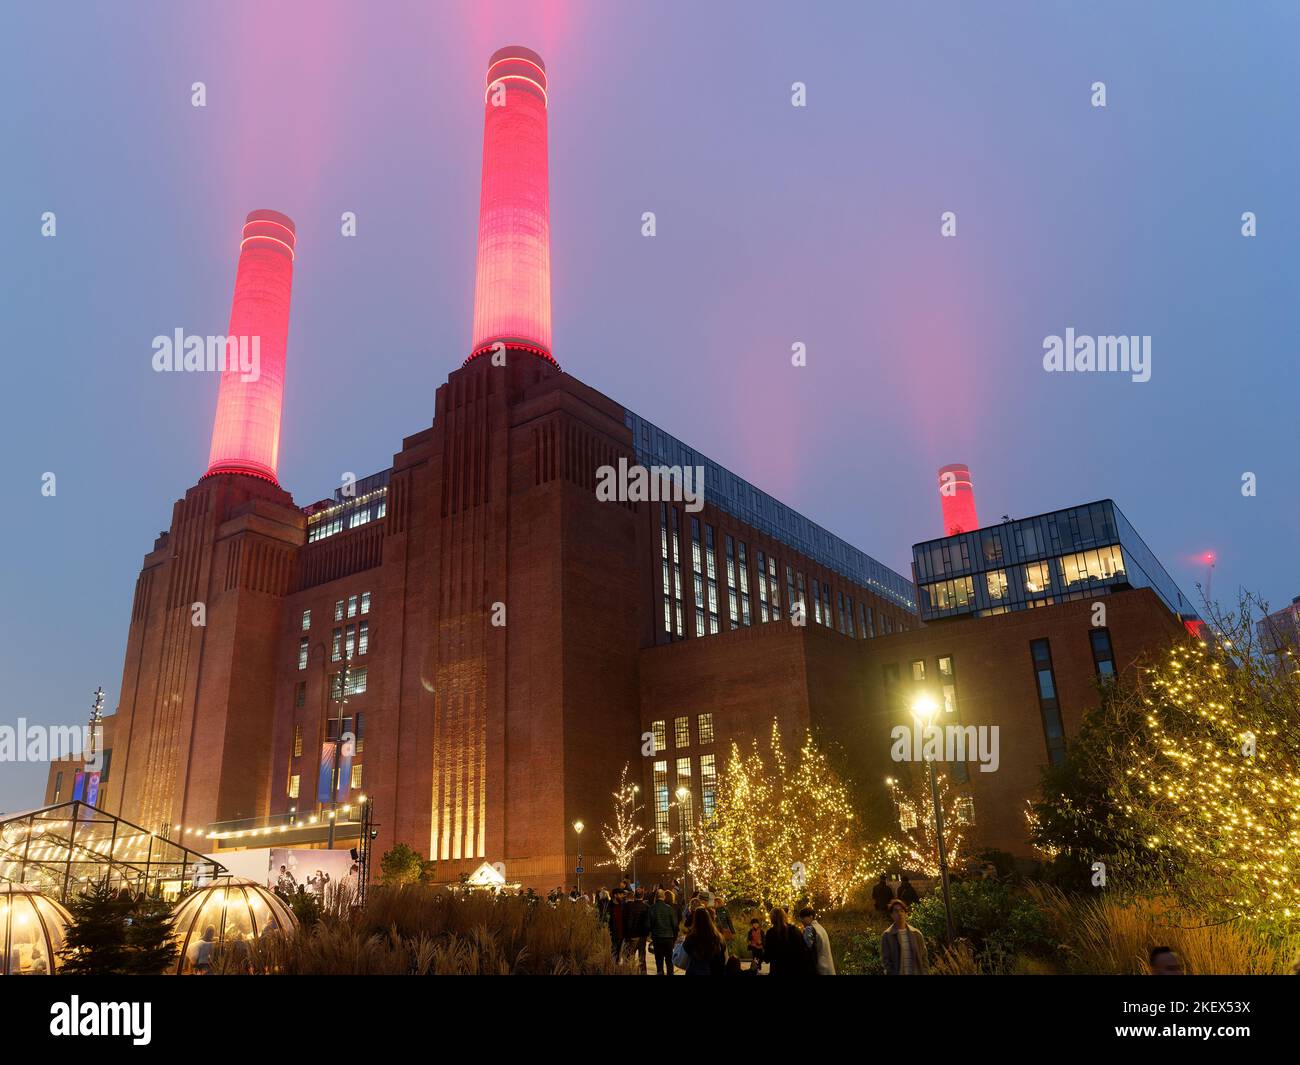 View looking up at Battersea Power Station in London illuminated at night with bright red chimneys piercing the sky Stock Photo